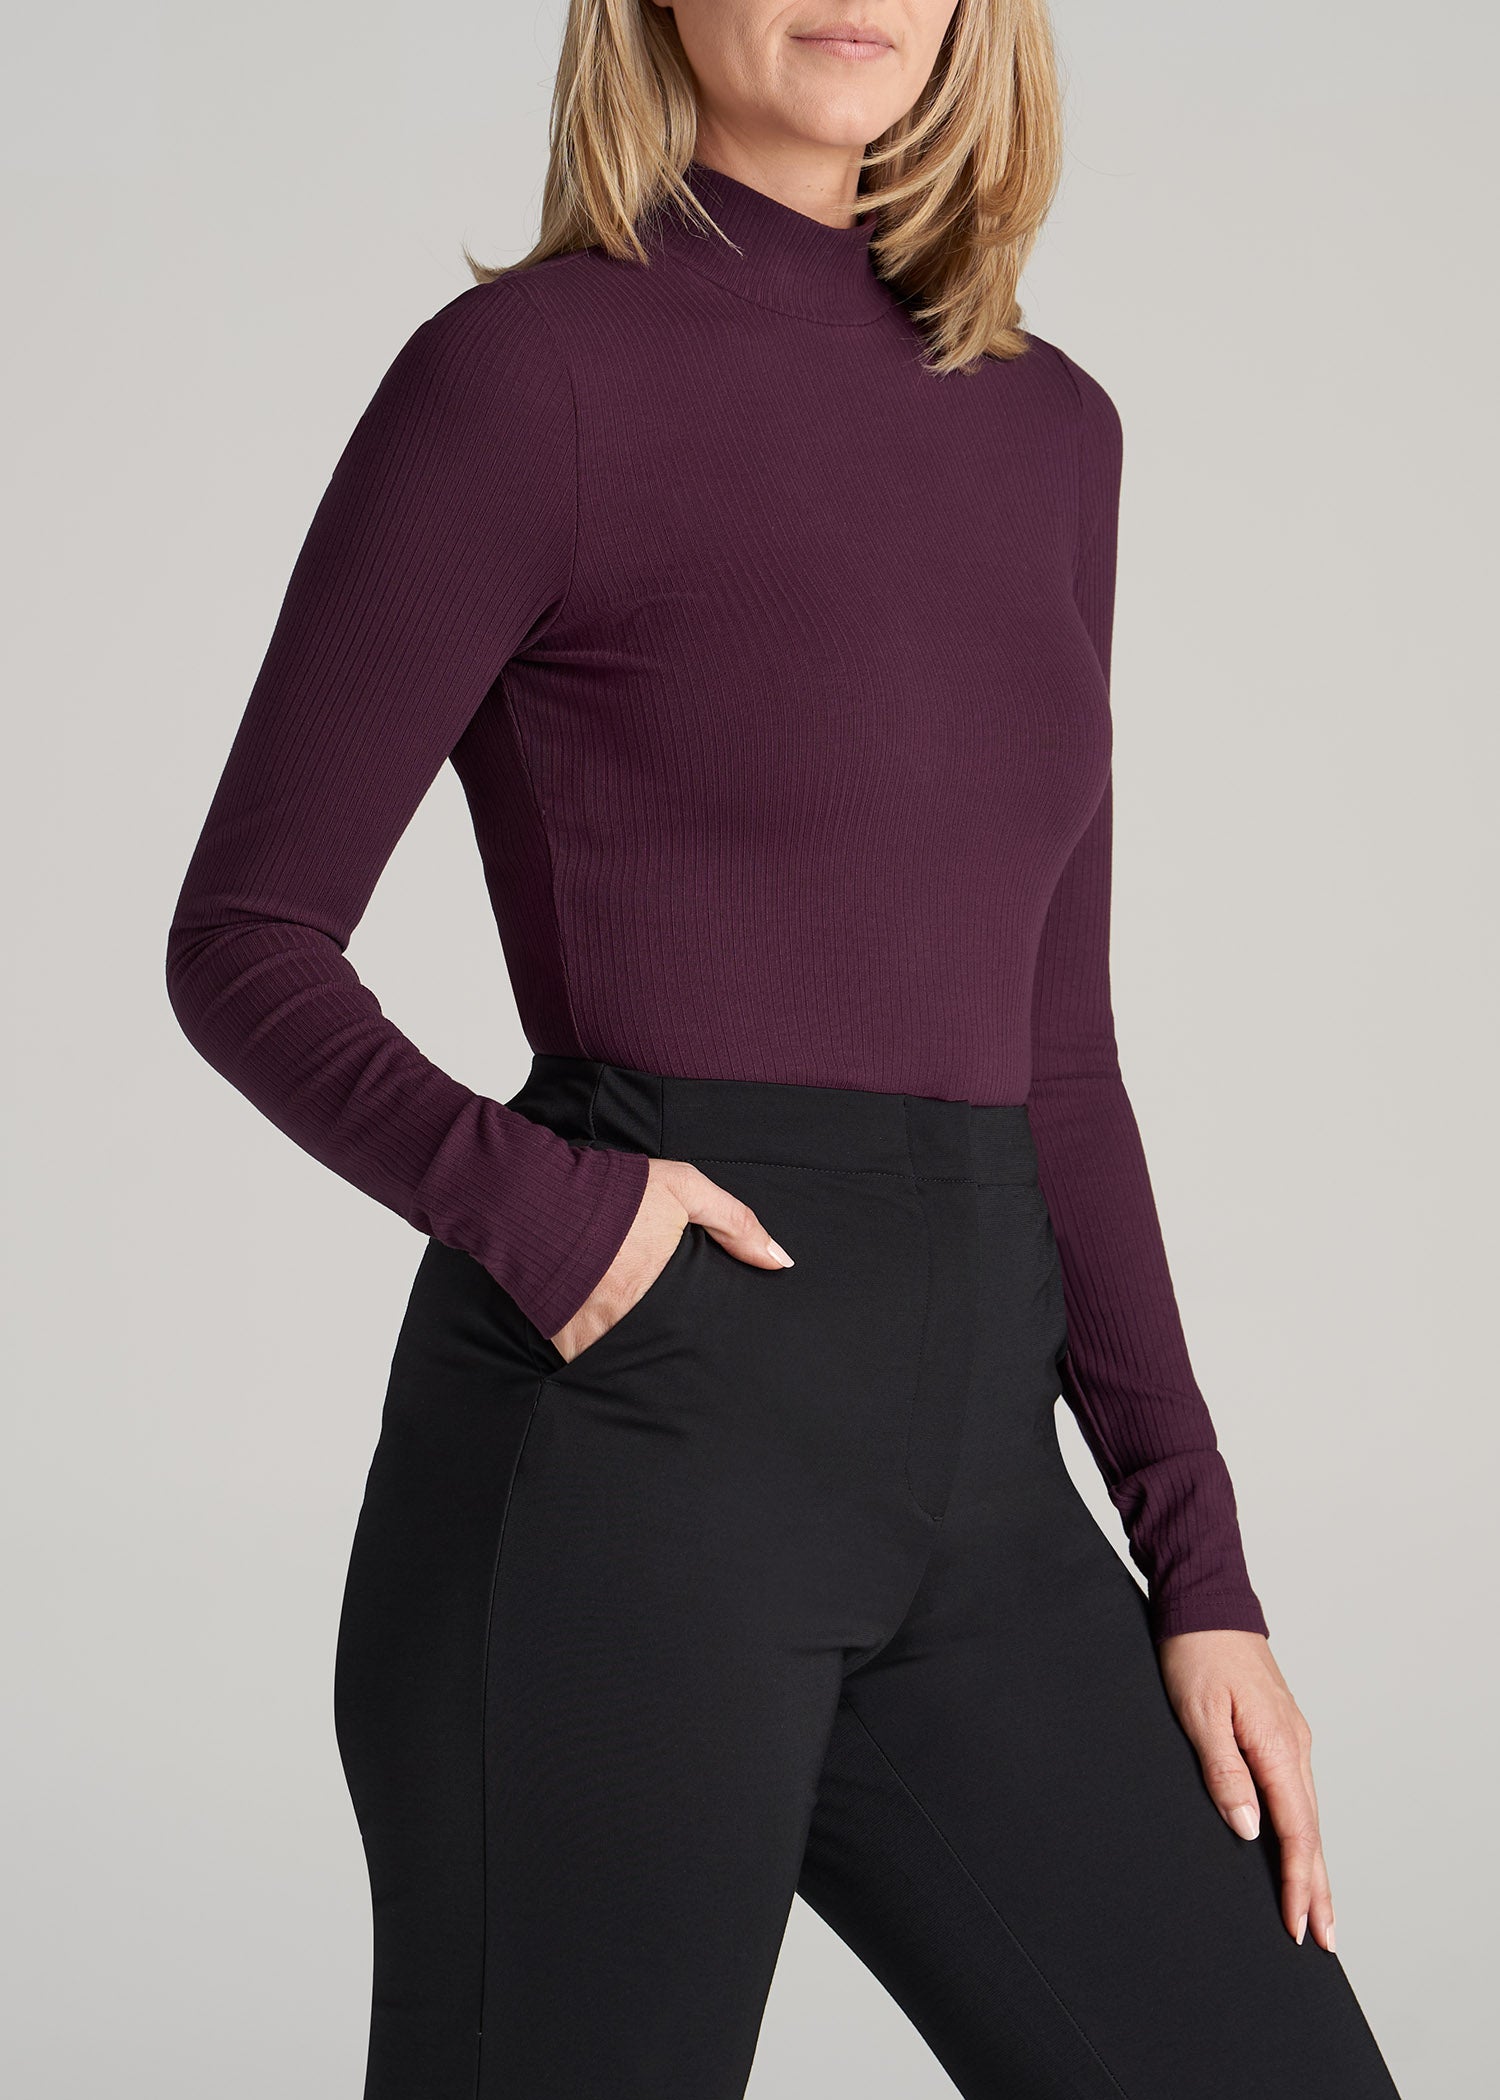 Long Sleeve Mock Neck Ribbed Top for Tall Women in Maroon